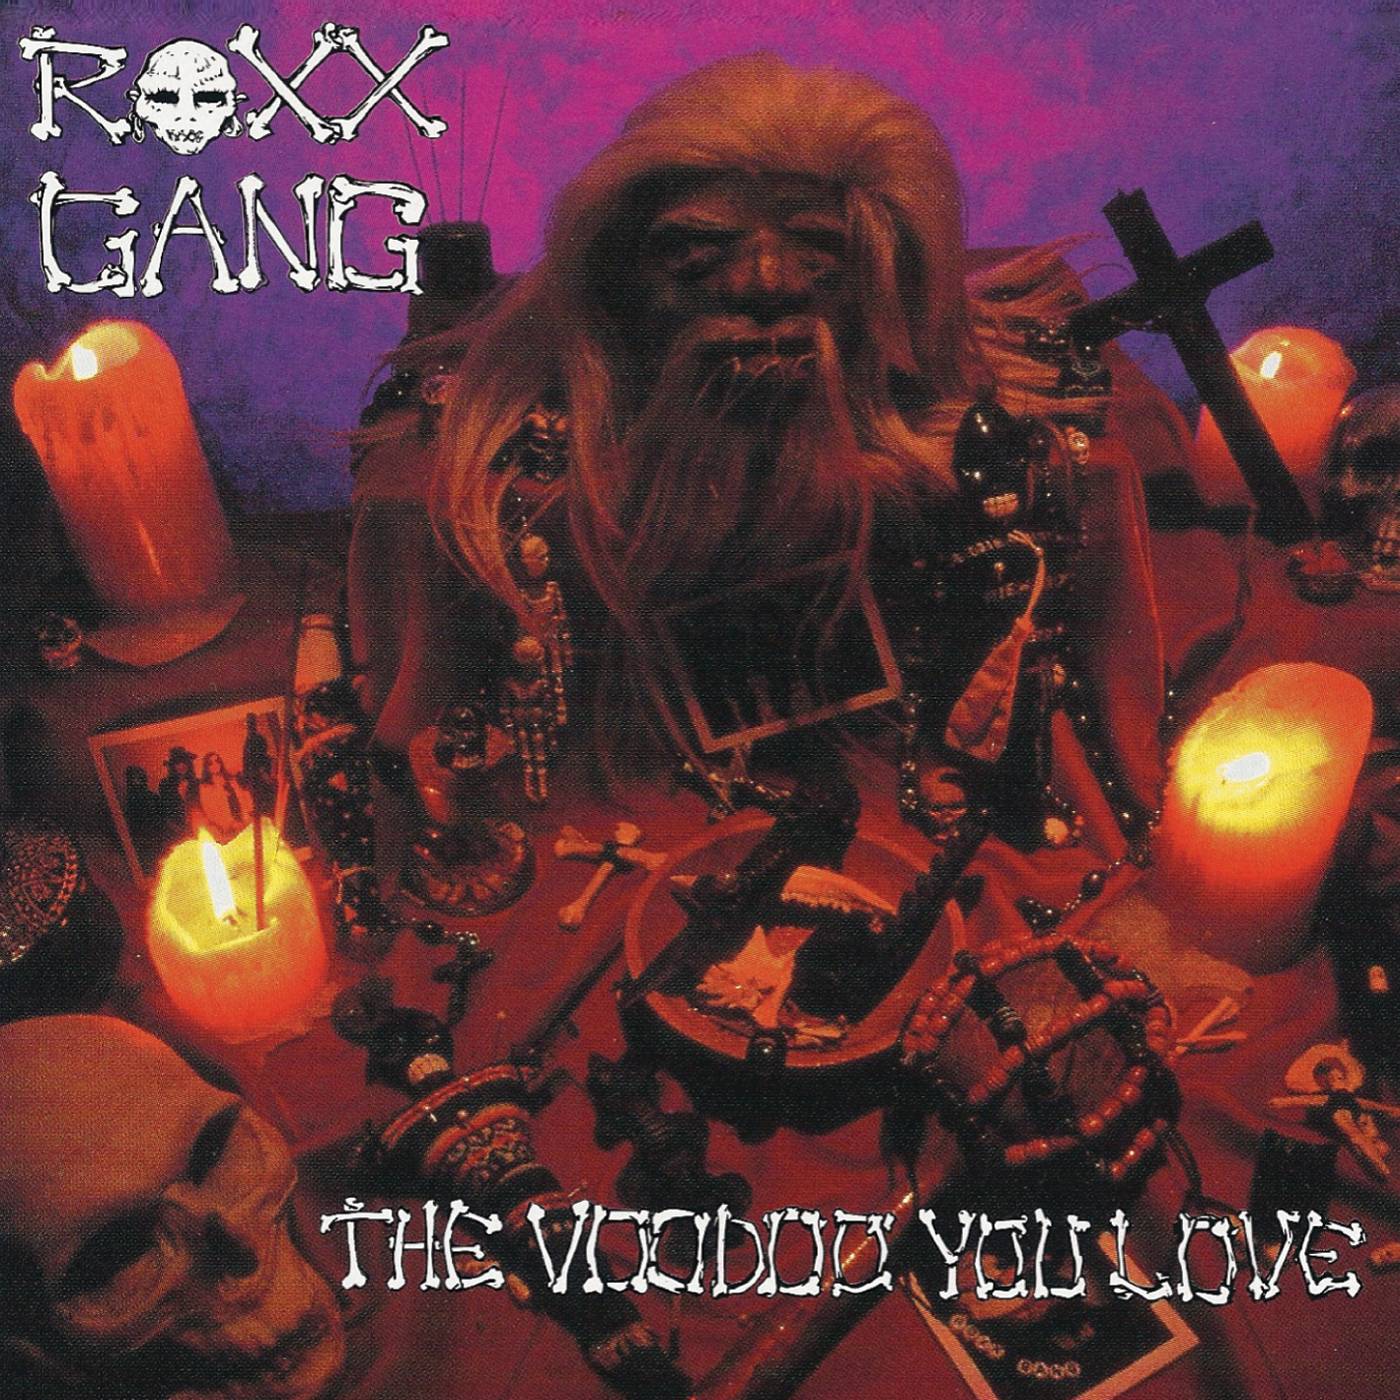 Roxx Gang:"The Voodoo You love" CD 17th February 2023 Perris Records.